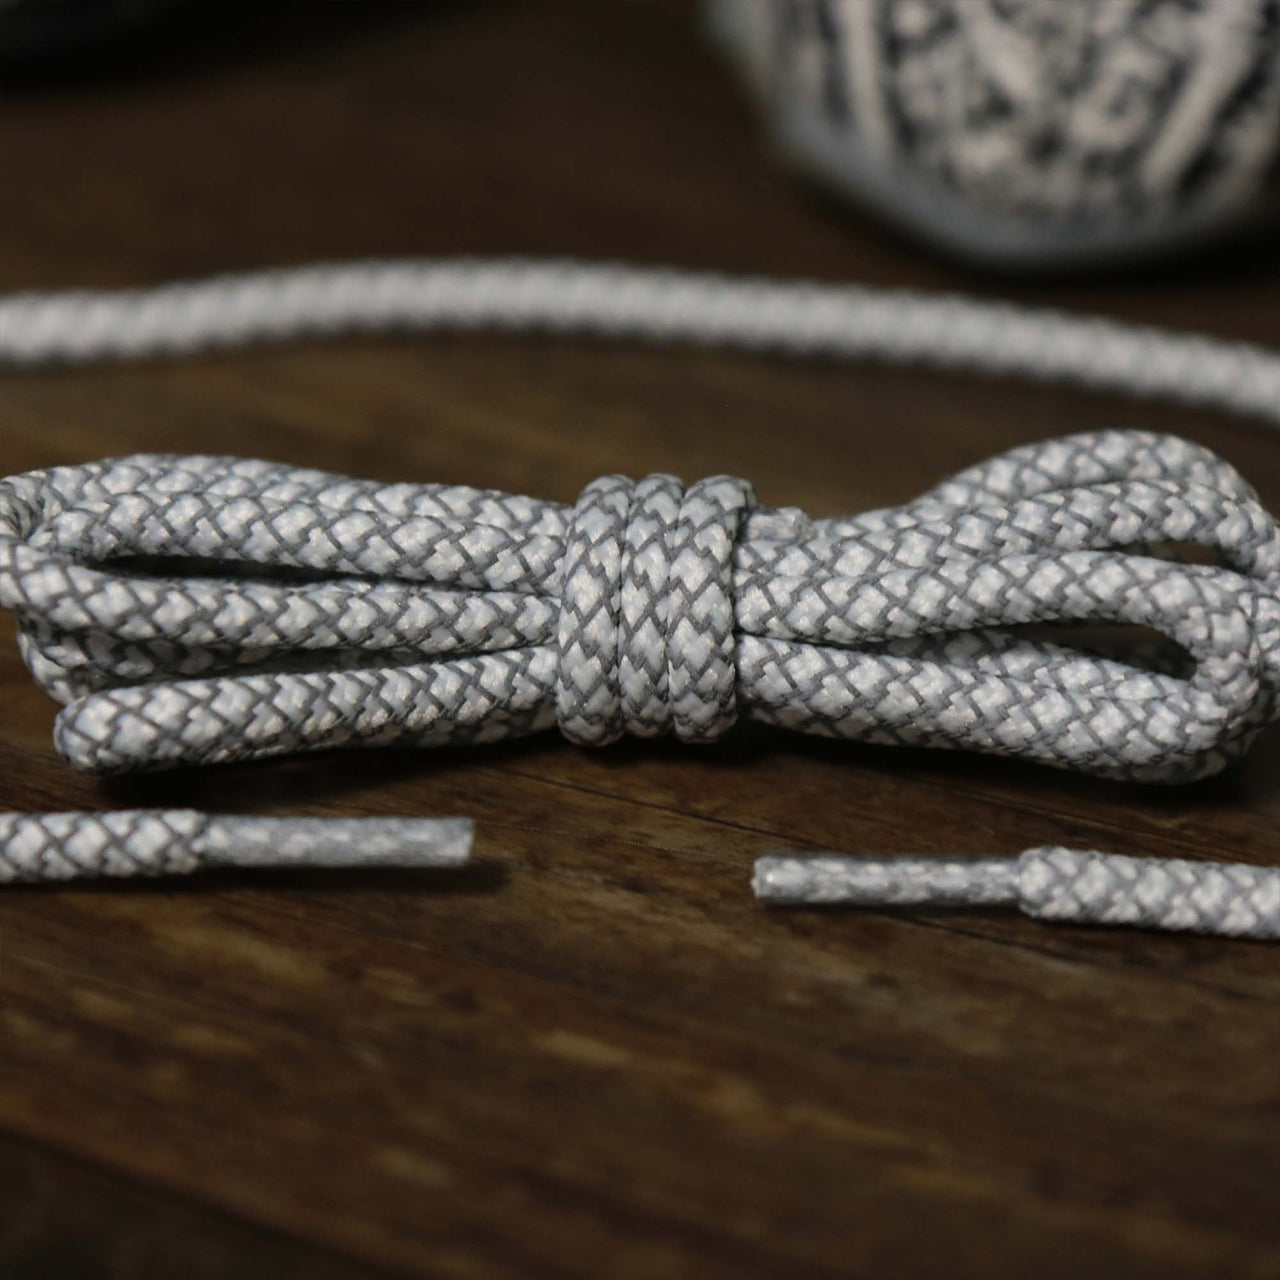 The 3M Reflective White/Ice Gray Solid Shoelaces with White/Ice Gray Aglets | 120cm Capswag unfolded